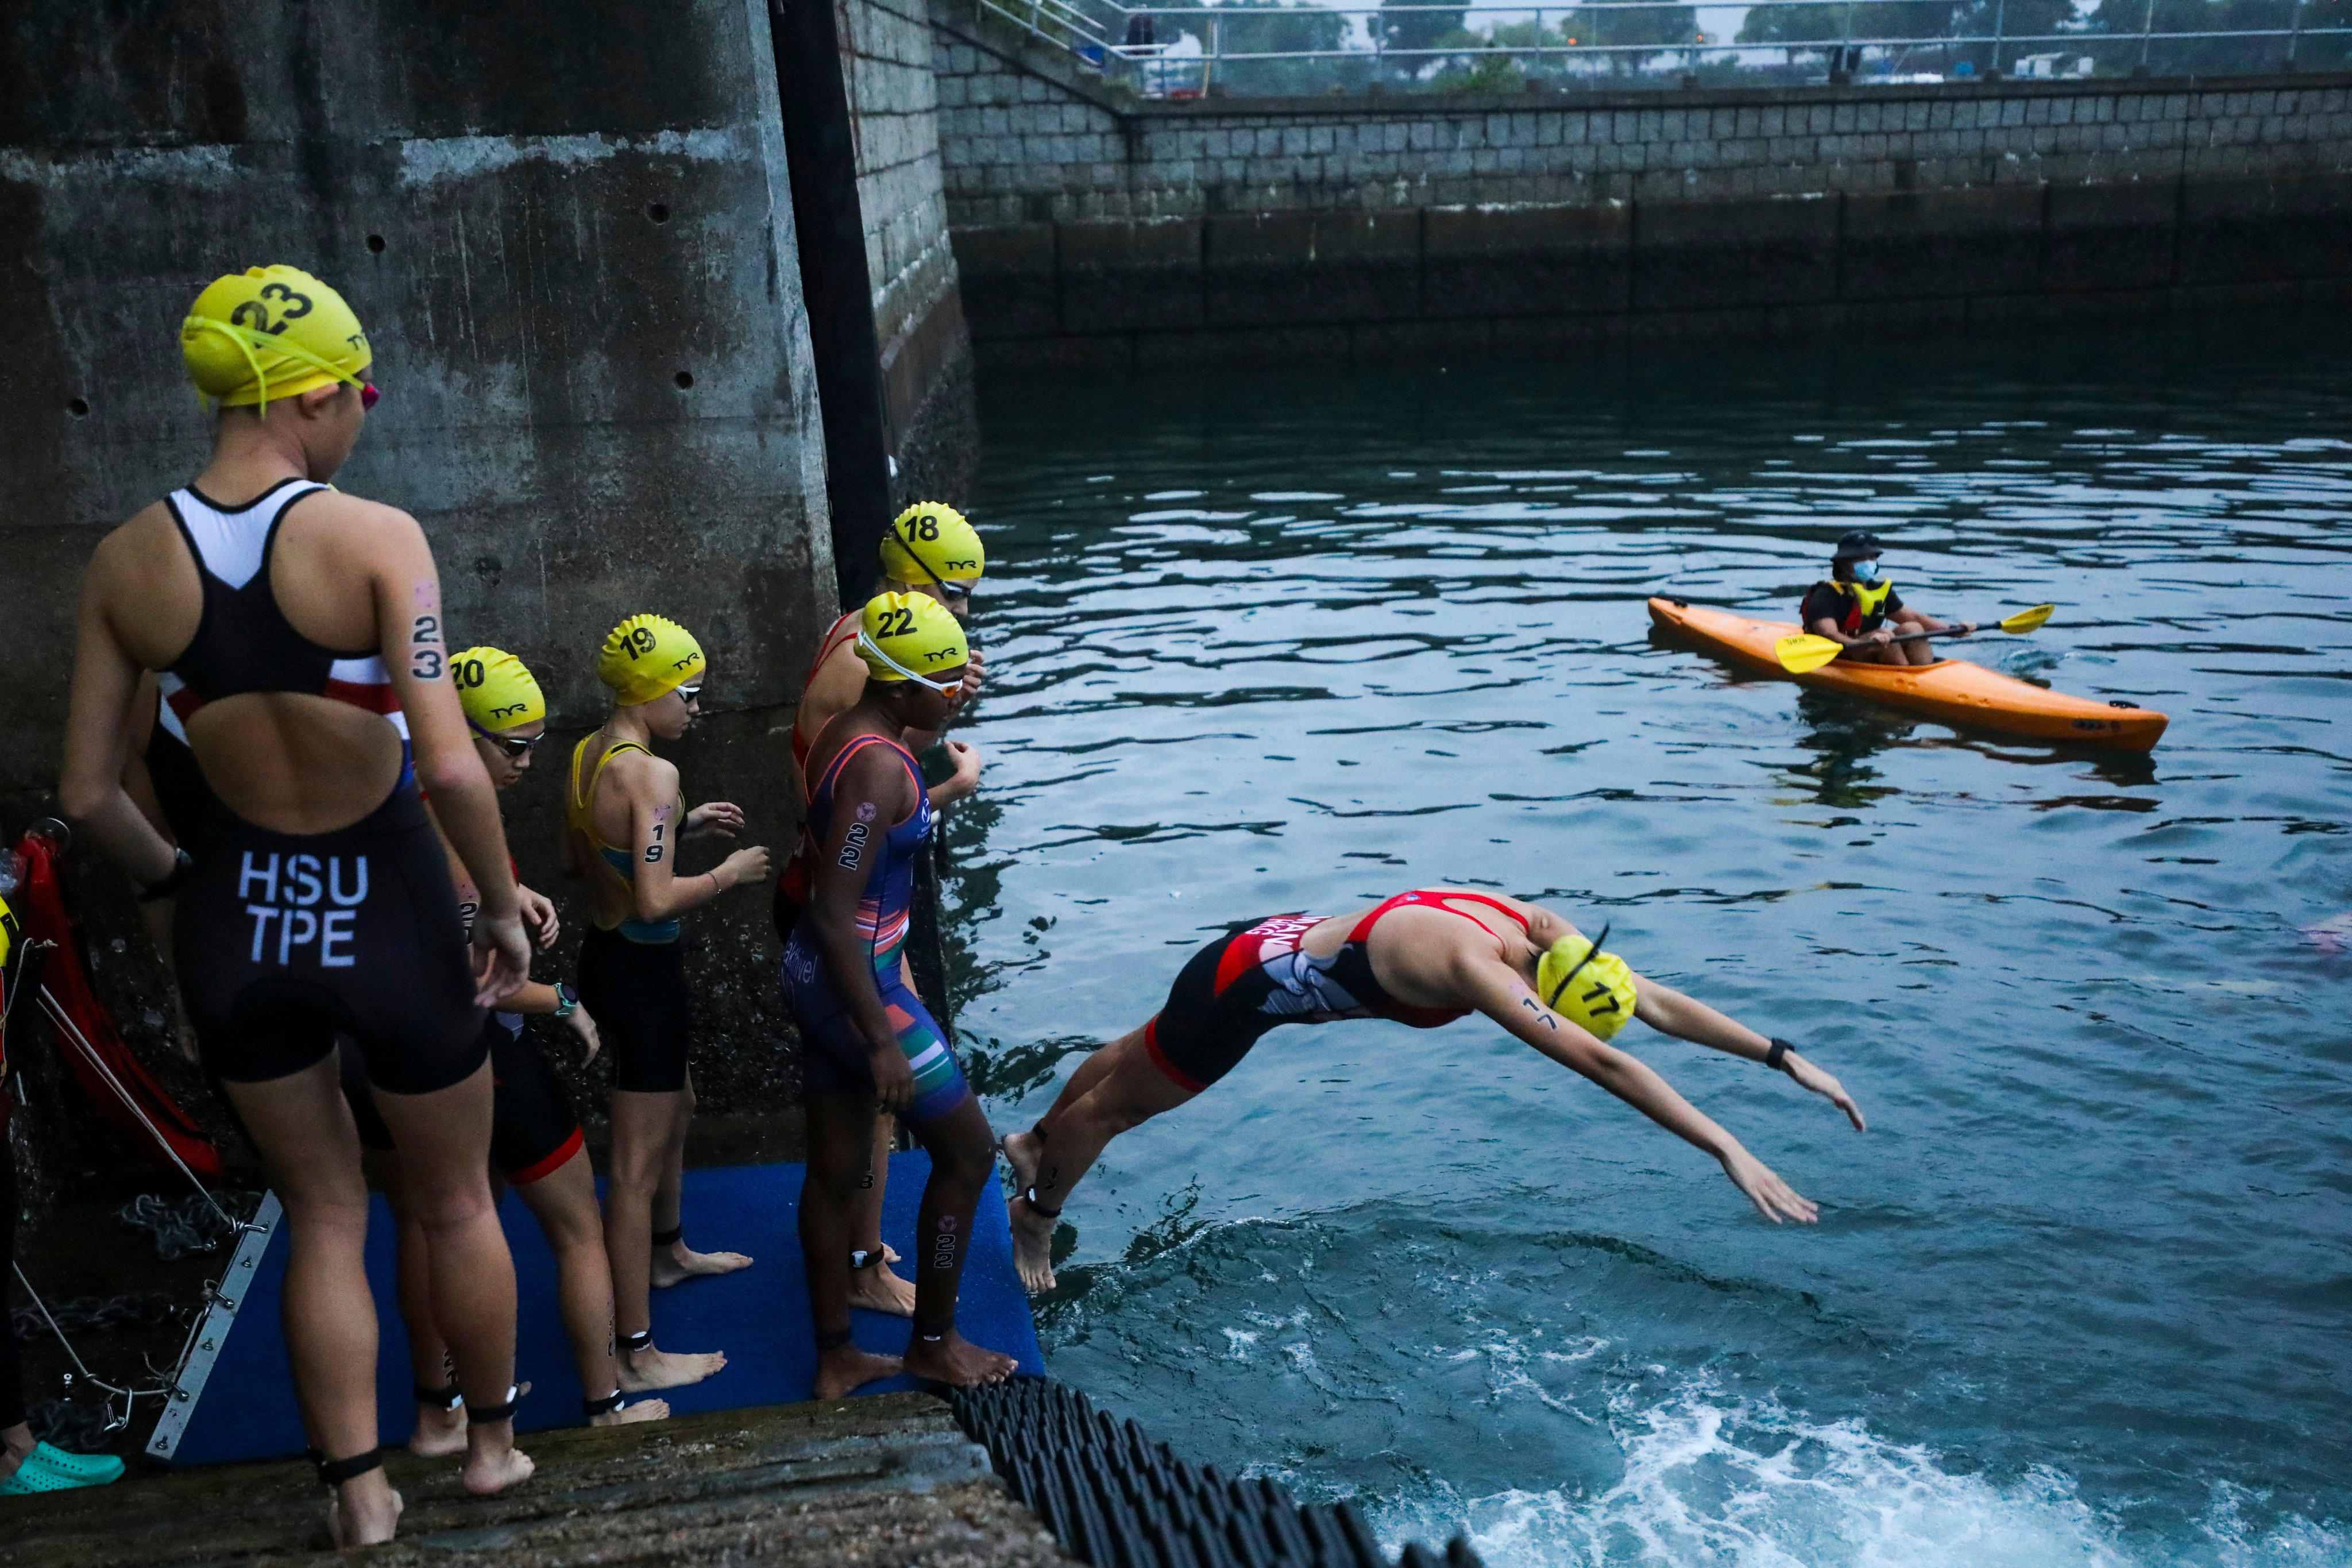 The Asia Triathlon Cup will be held twice in Hong Kong this year. Photo: Xiaomei Chen